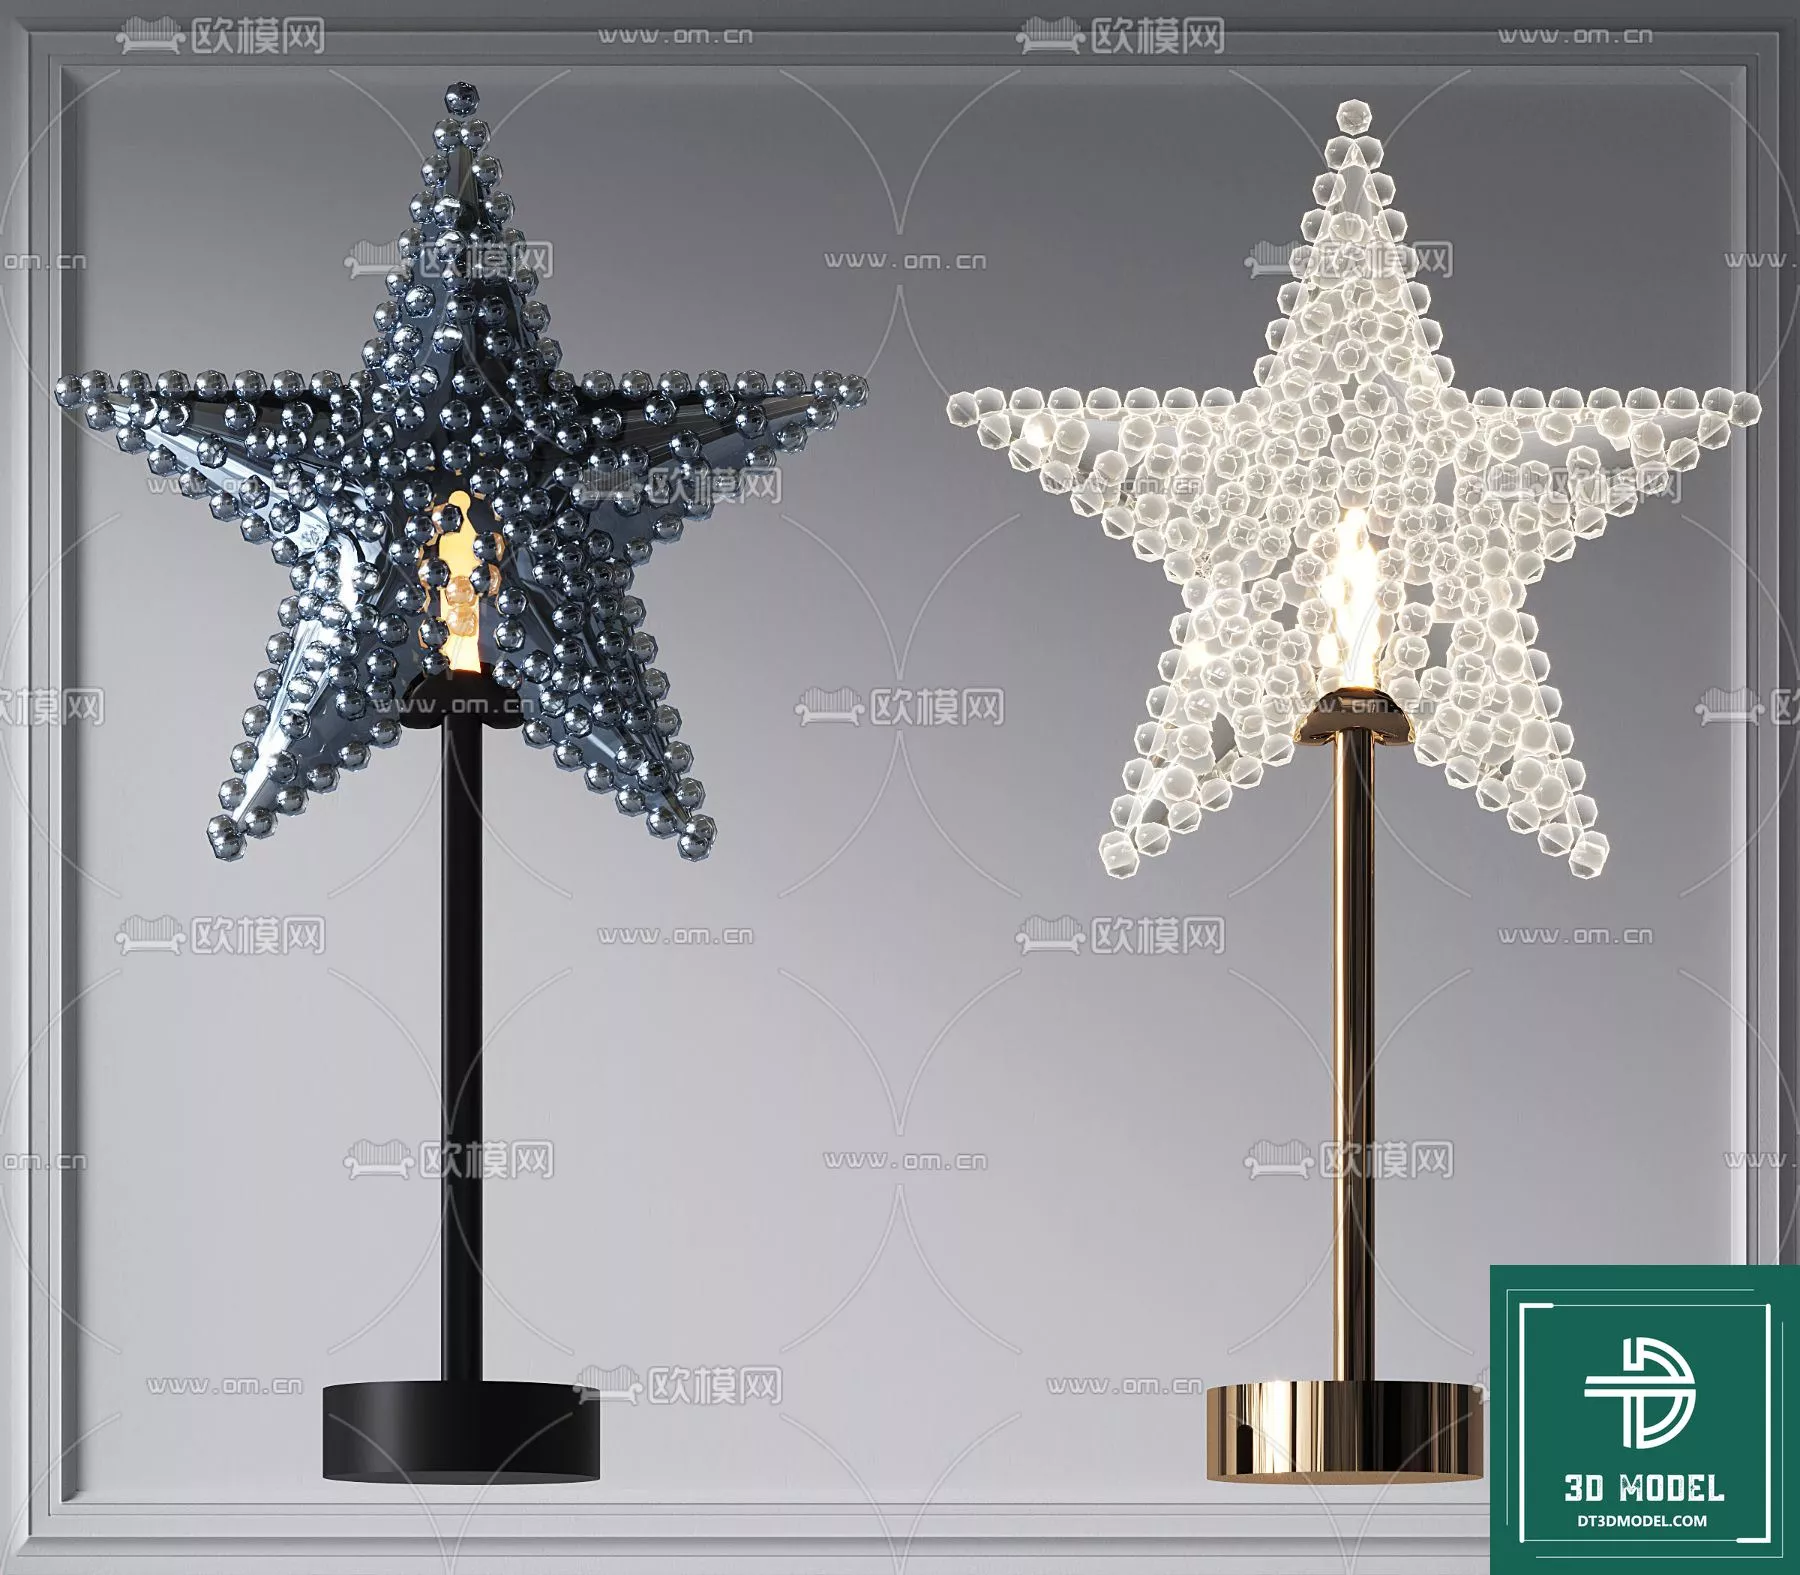 MODERN TABLE LAMP - SKETCHUP 3D MODEL - VRAY OR ENSCAPE - ID14542